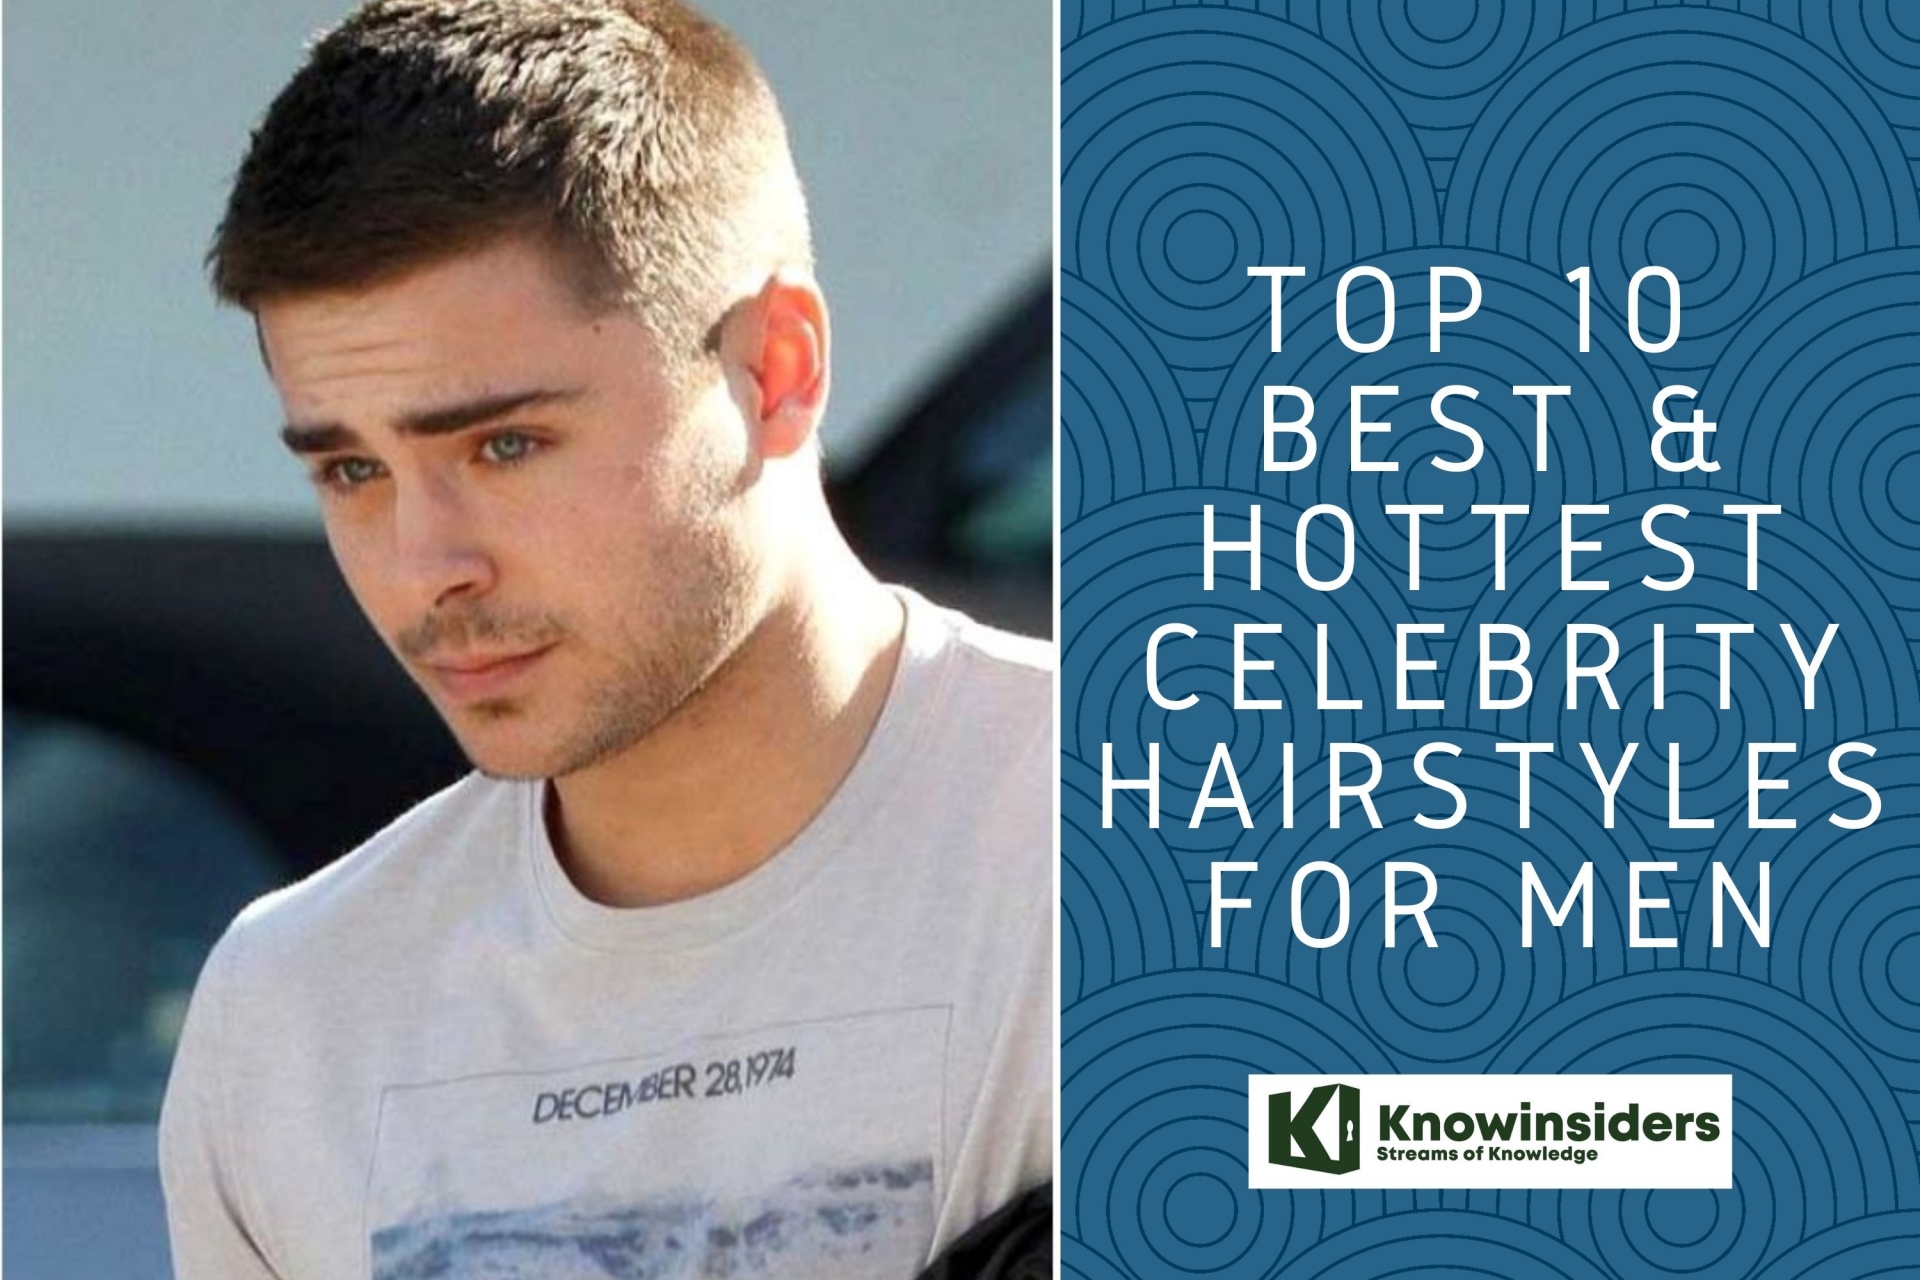 Celebrity hairstyles for men. Photo: KnowInsiders